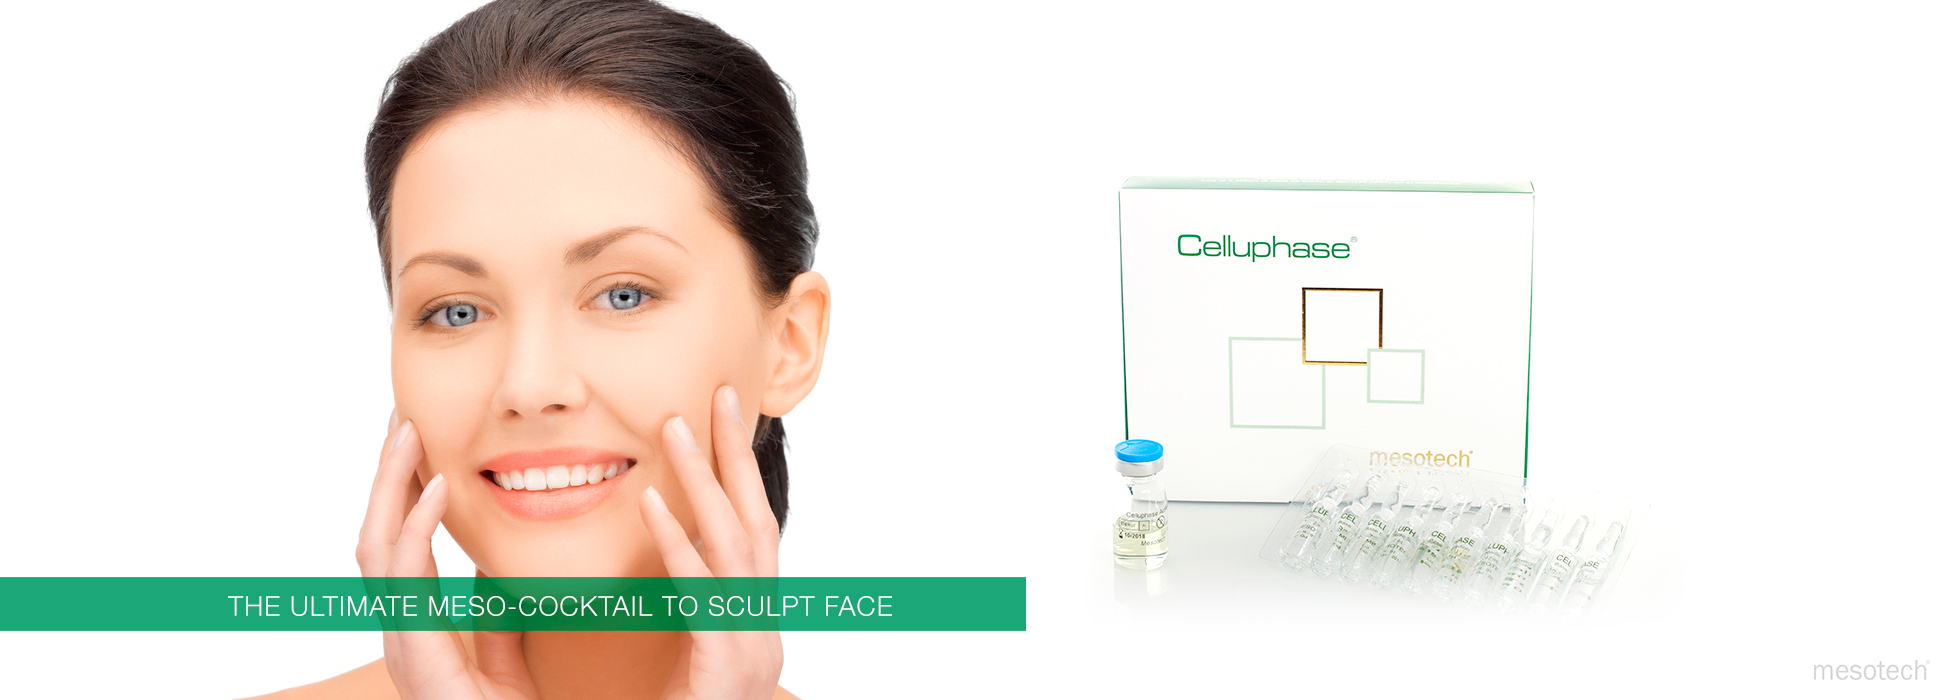 Celluphase - by Mesotech mesotherapy and cosmetics 